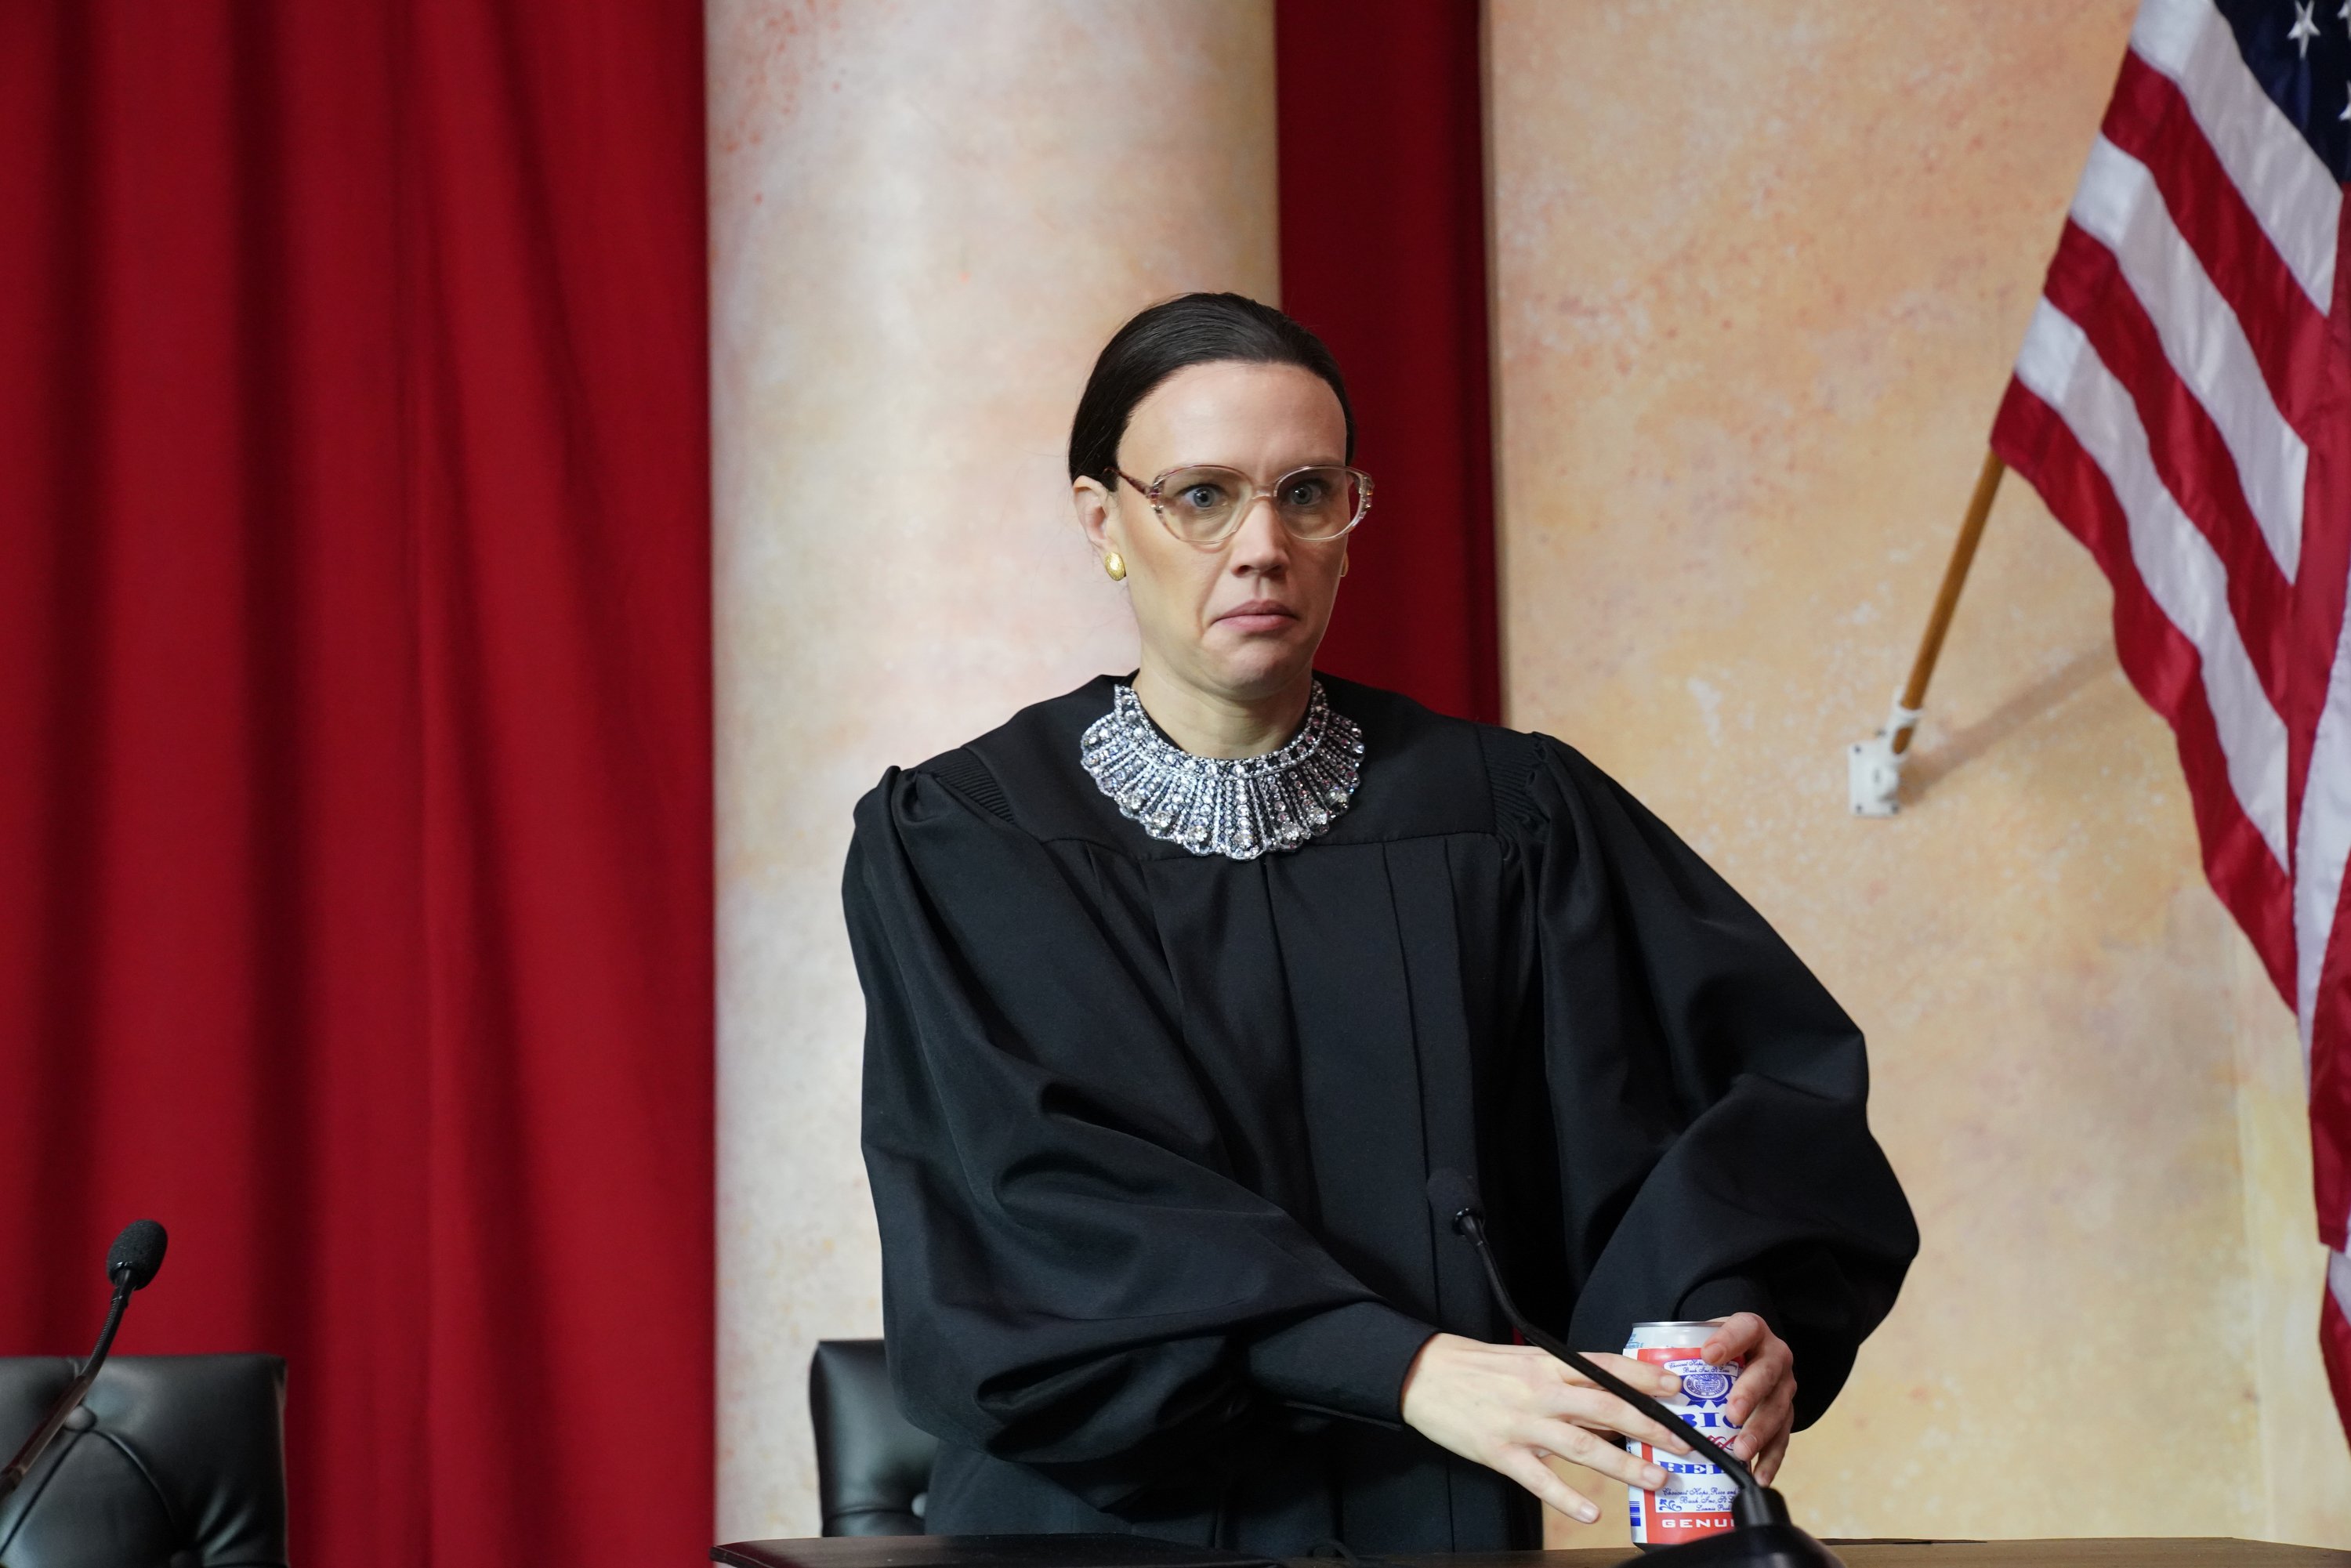 Kate McKinnon playing the role of Justice Ruth Bader Ginsburg during the "Courtroom Rap" sketch of "Saturday Night Live" in 2018 | Photo: Steve Molina Contreras/NBCU Photo Bank/NBCUniversal via Getty Images